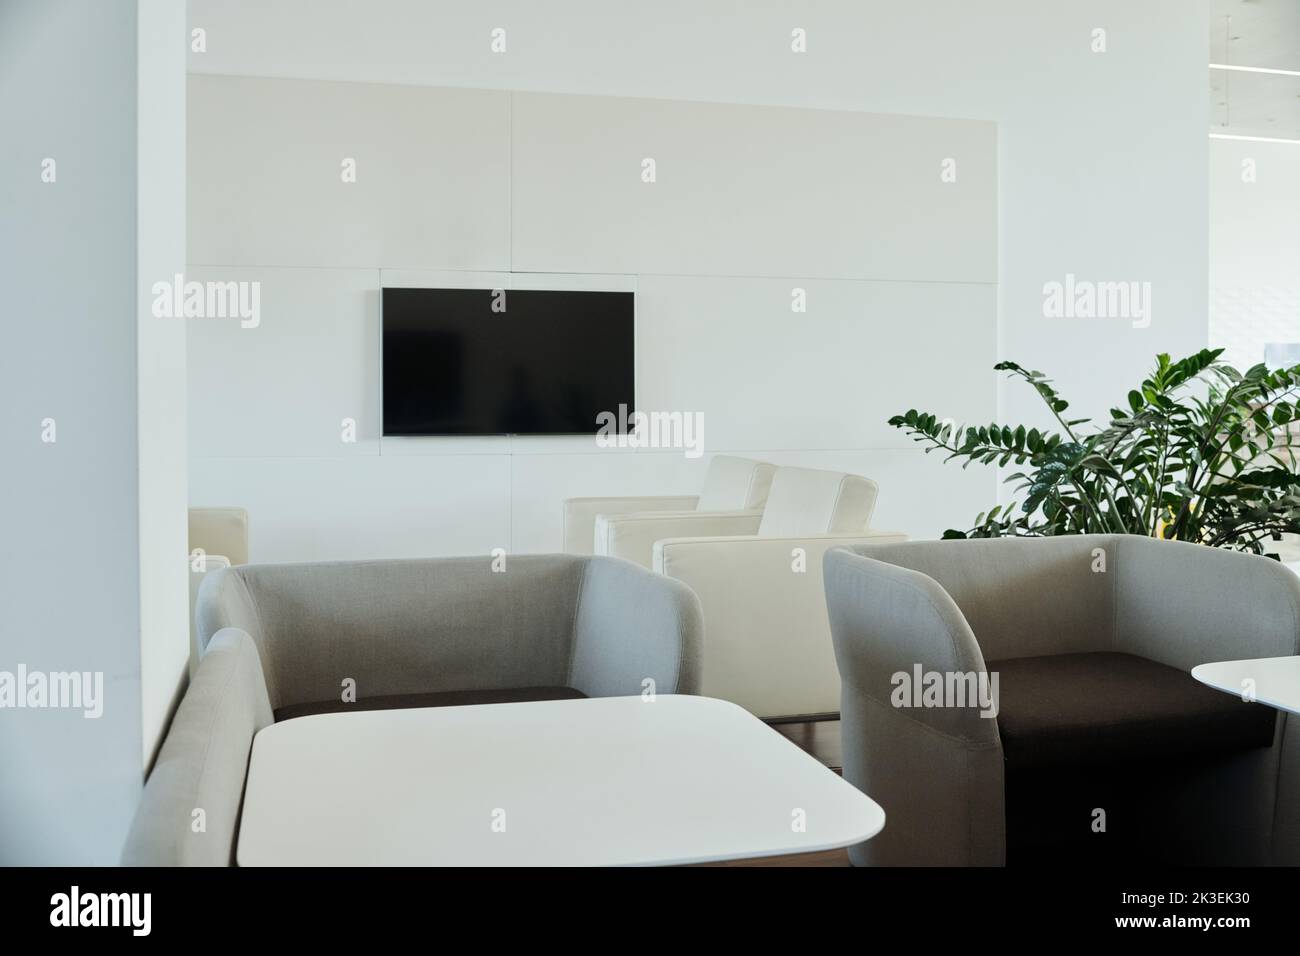 Part of modern comfortable openspace office with tv screen on wall, white leather and grey velvet armchairs and small square tables Stock Photo